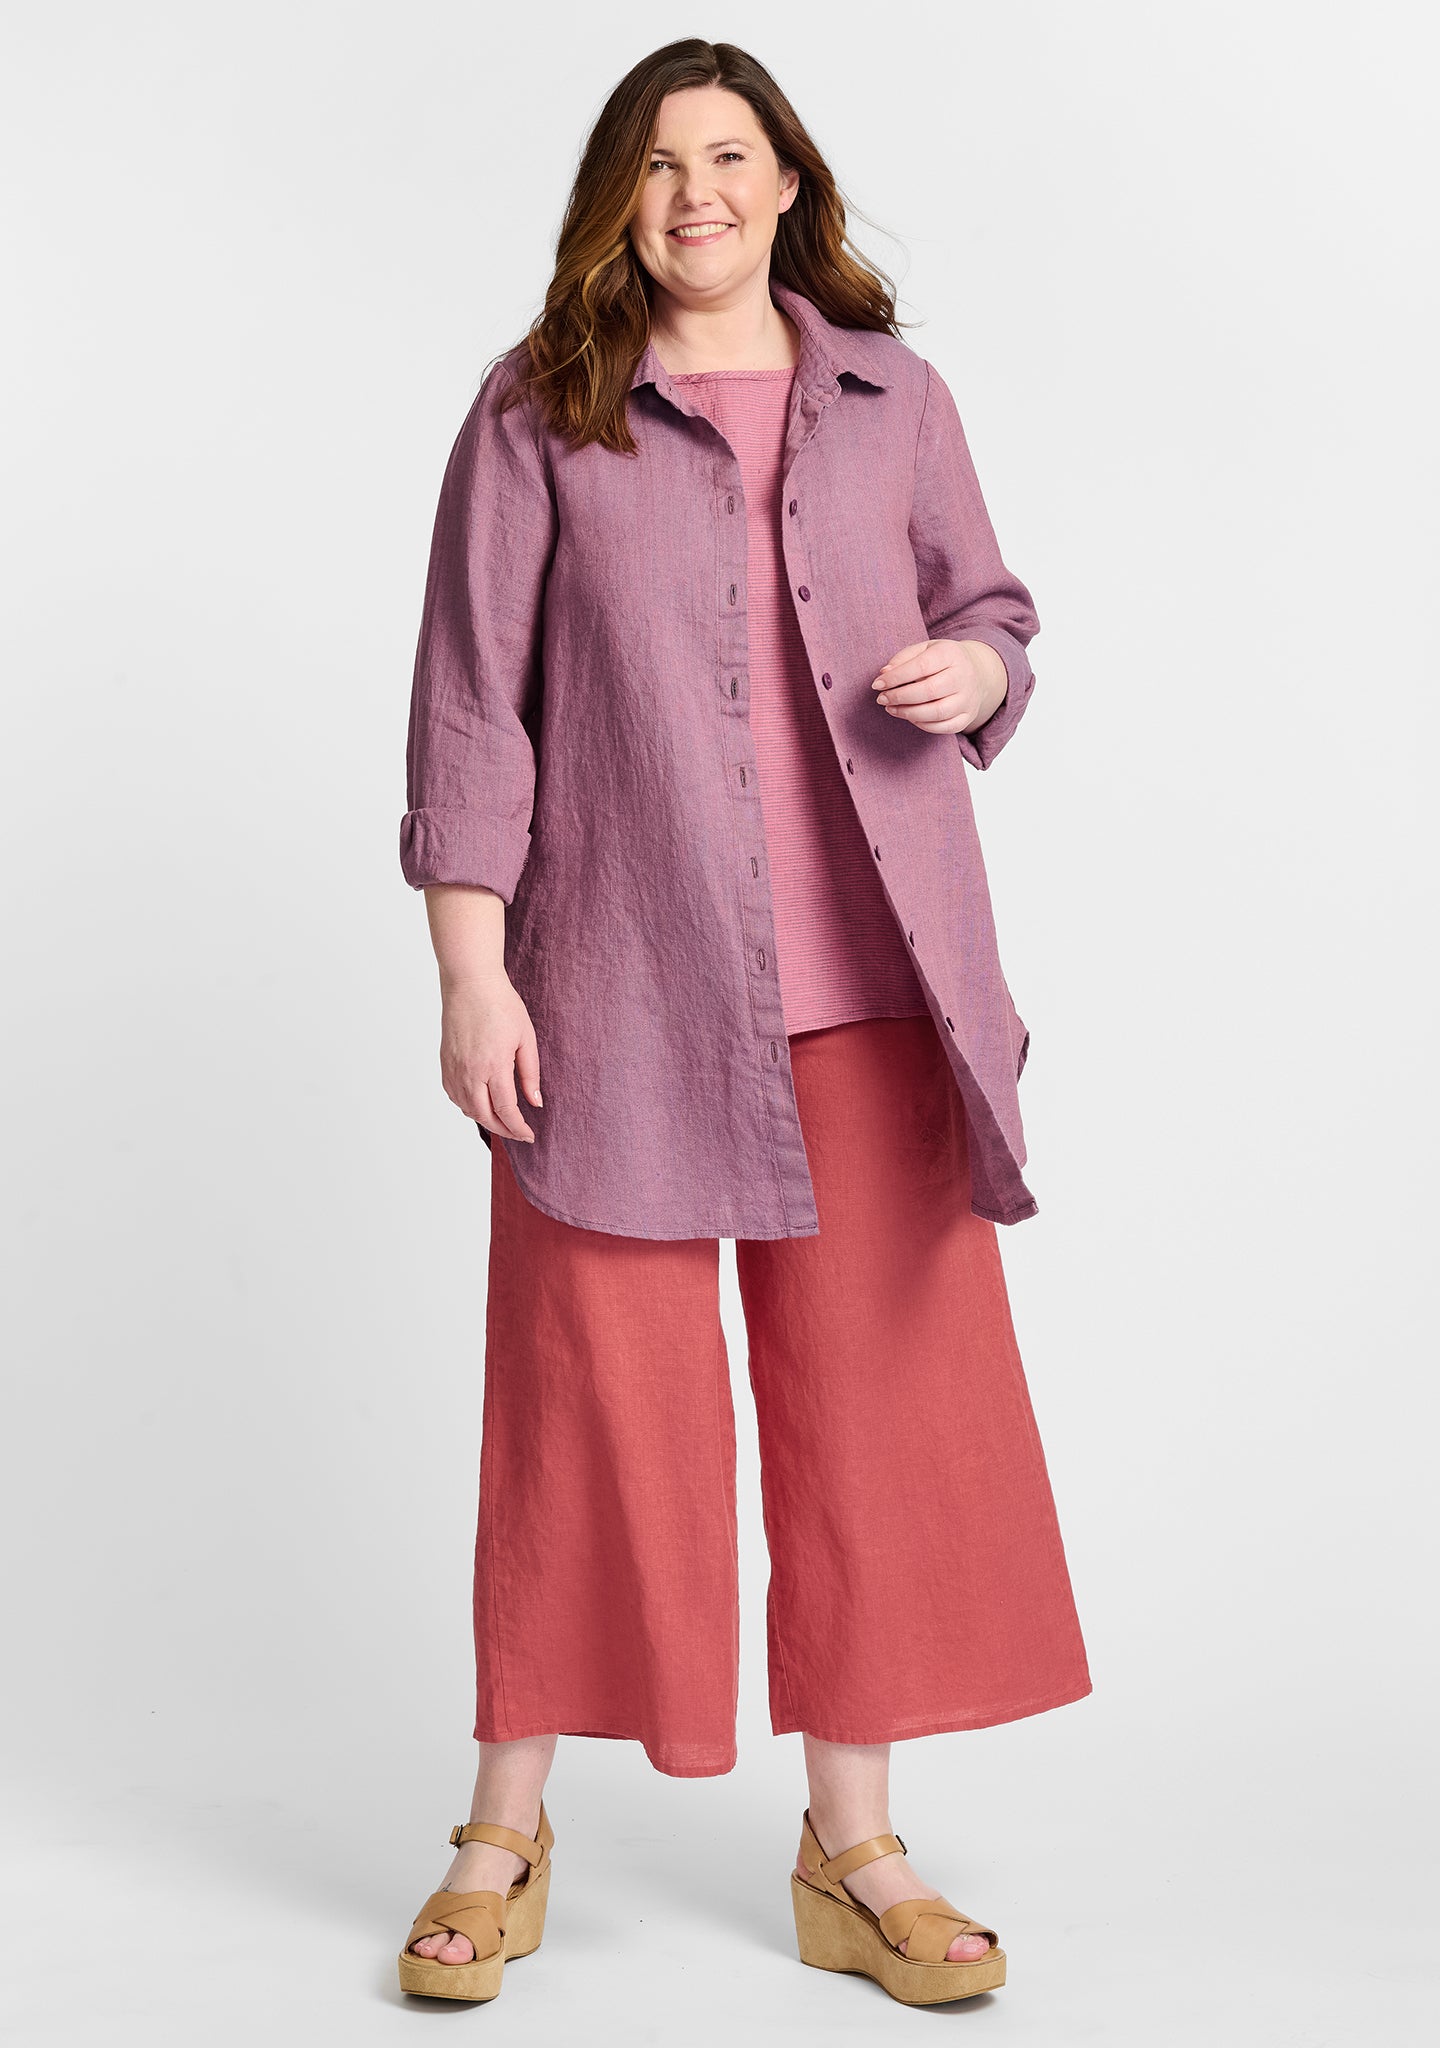 FLAX linen blouse in purple with linen tank in red and linen pants in red